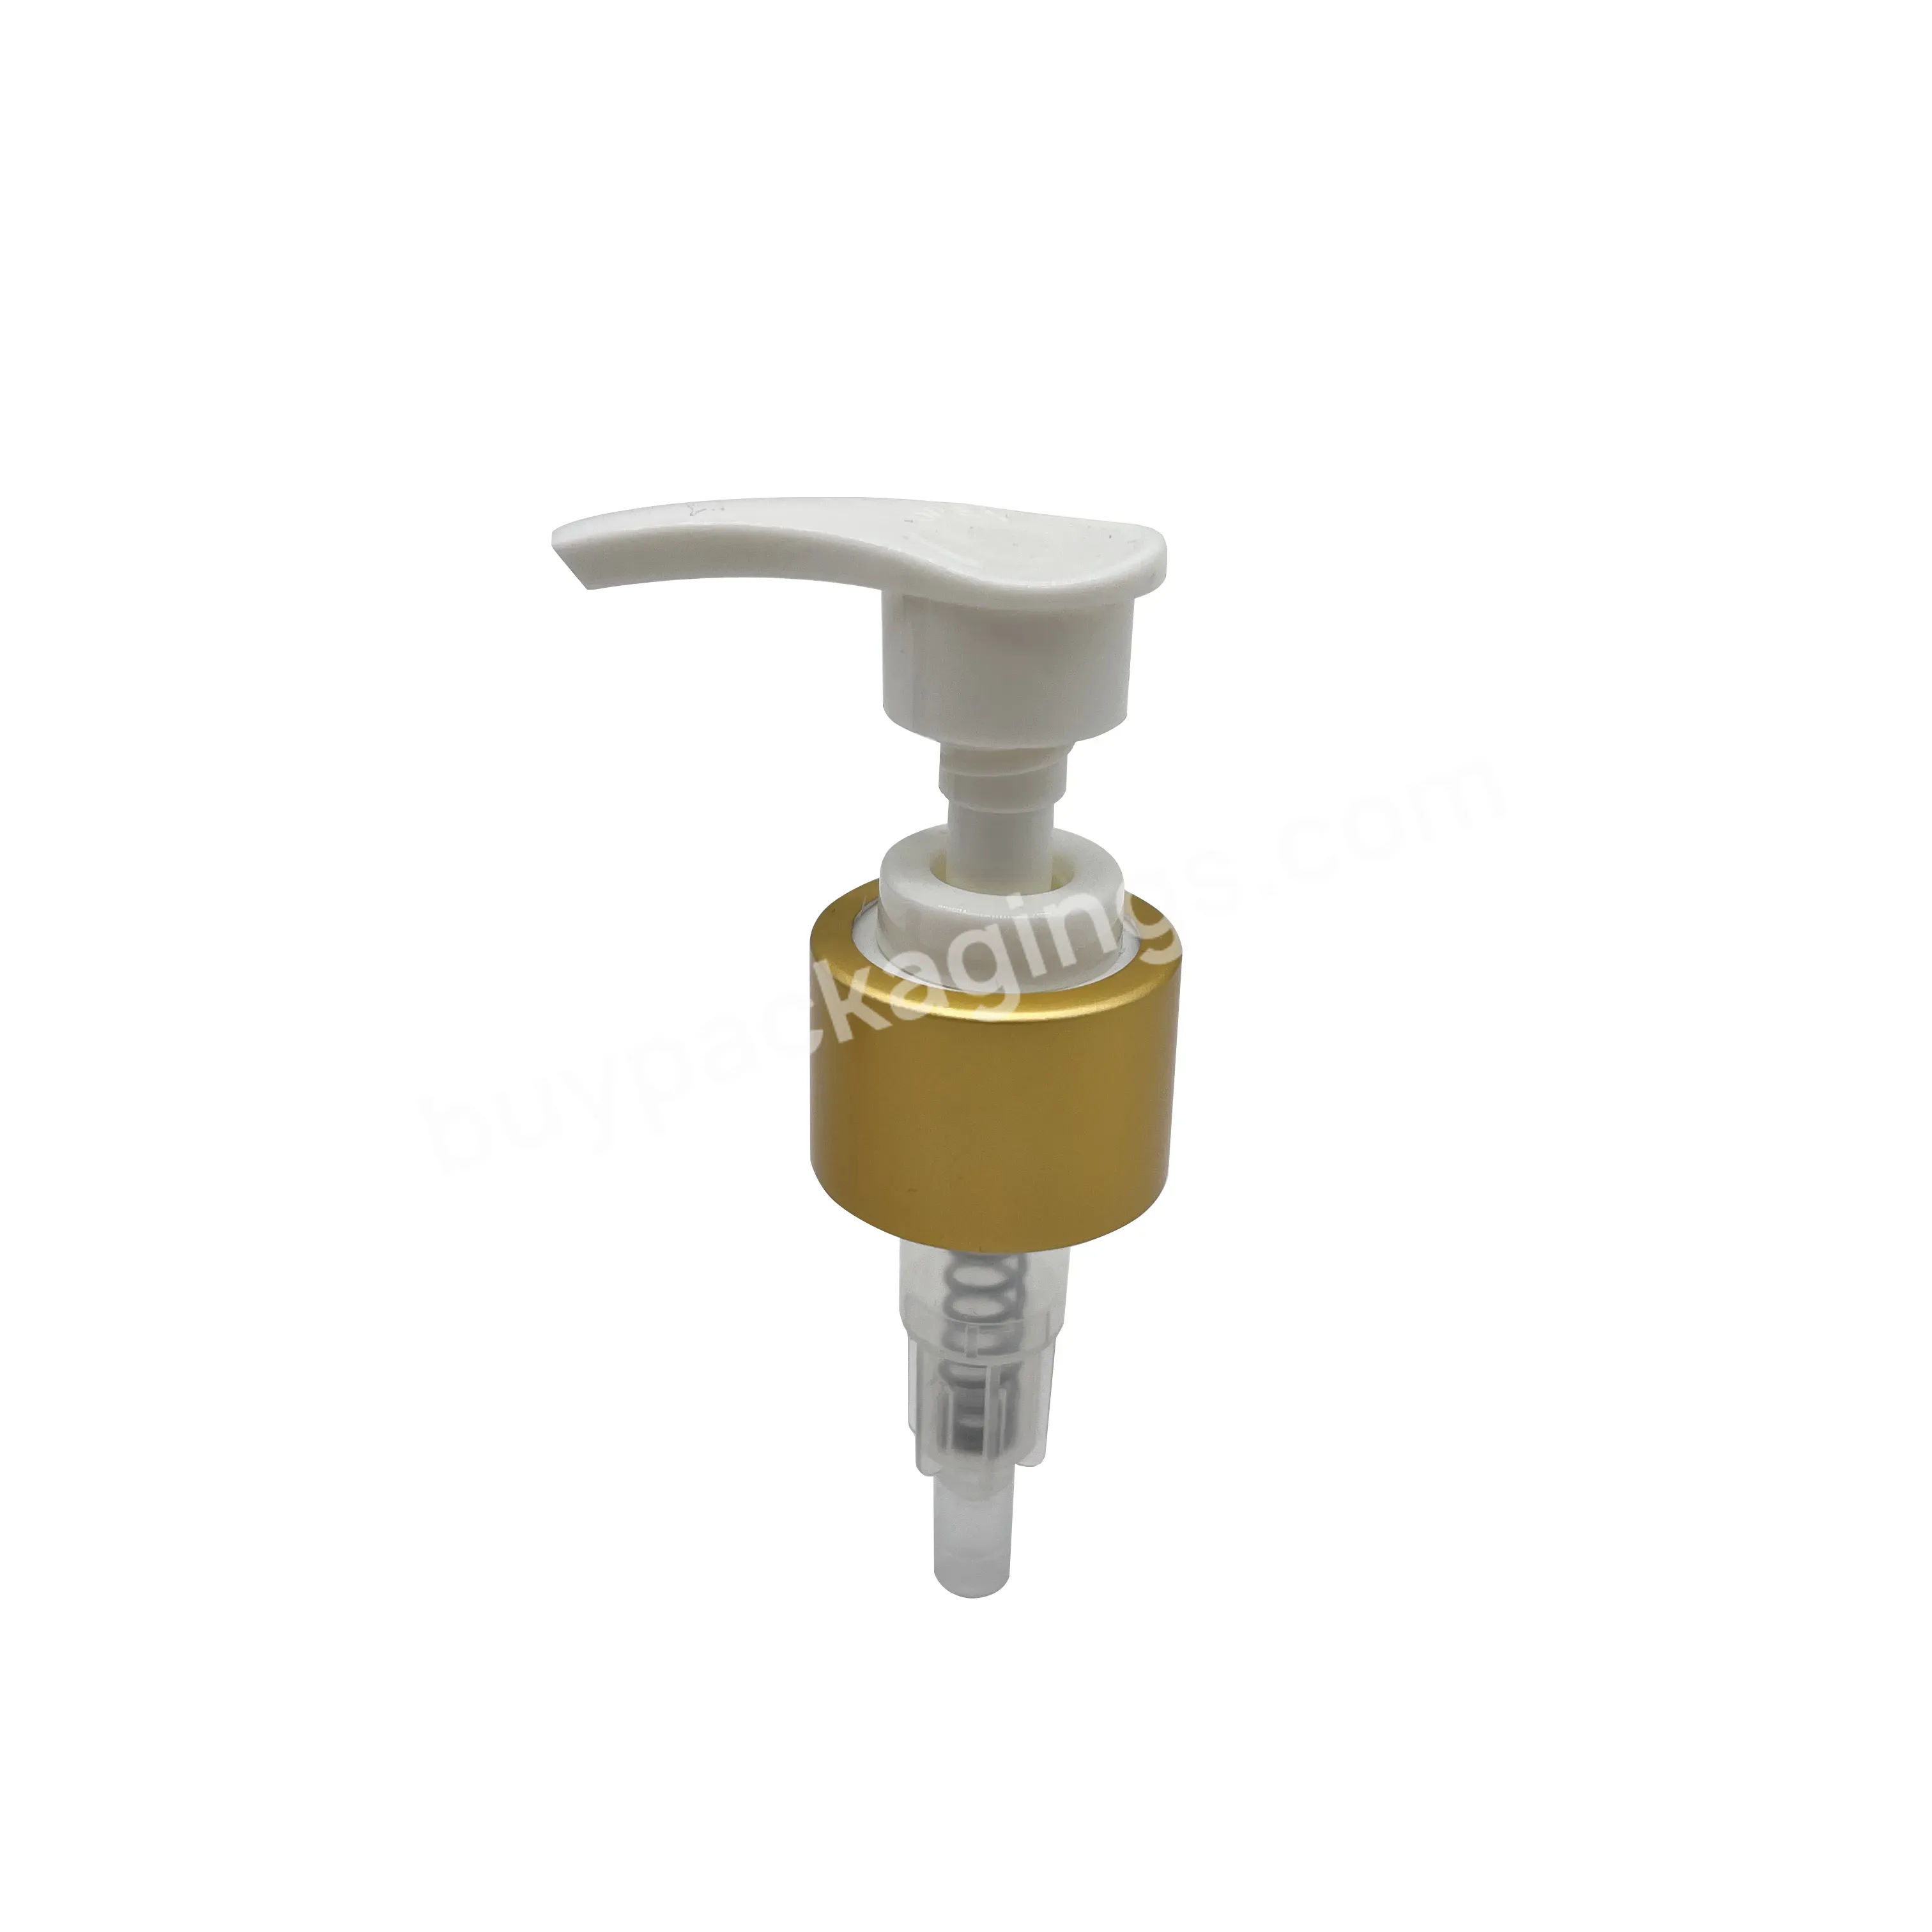 20/410 24/410 28/410 High Quality Matte Light Gold Collar Aluminum Lotion Pump With Twist Up Lock - Buy 24mm Metal Lotion Pump With Gold Collar,Aluminum Lotion Pump 24/410,Metal Cosmeticlotion Pump 24/410.